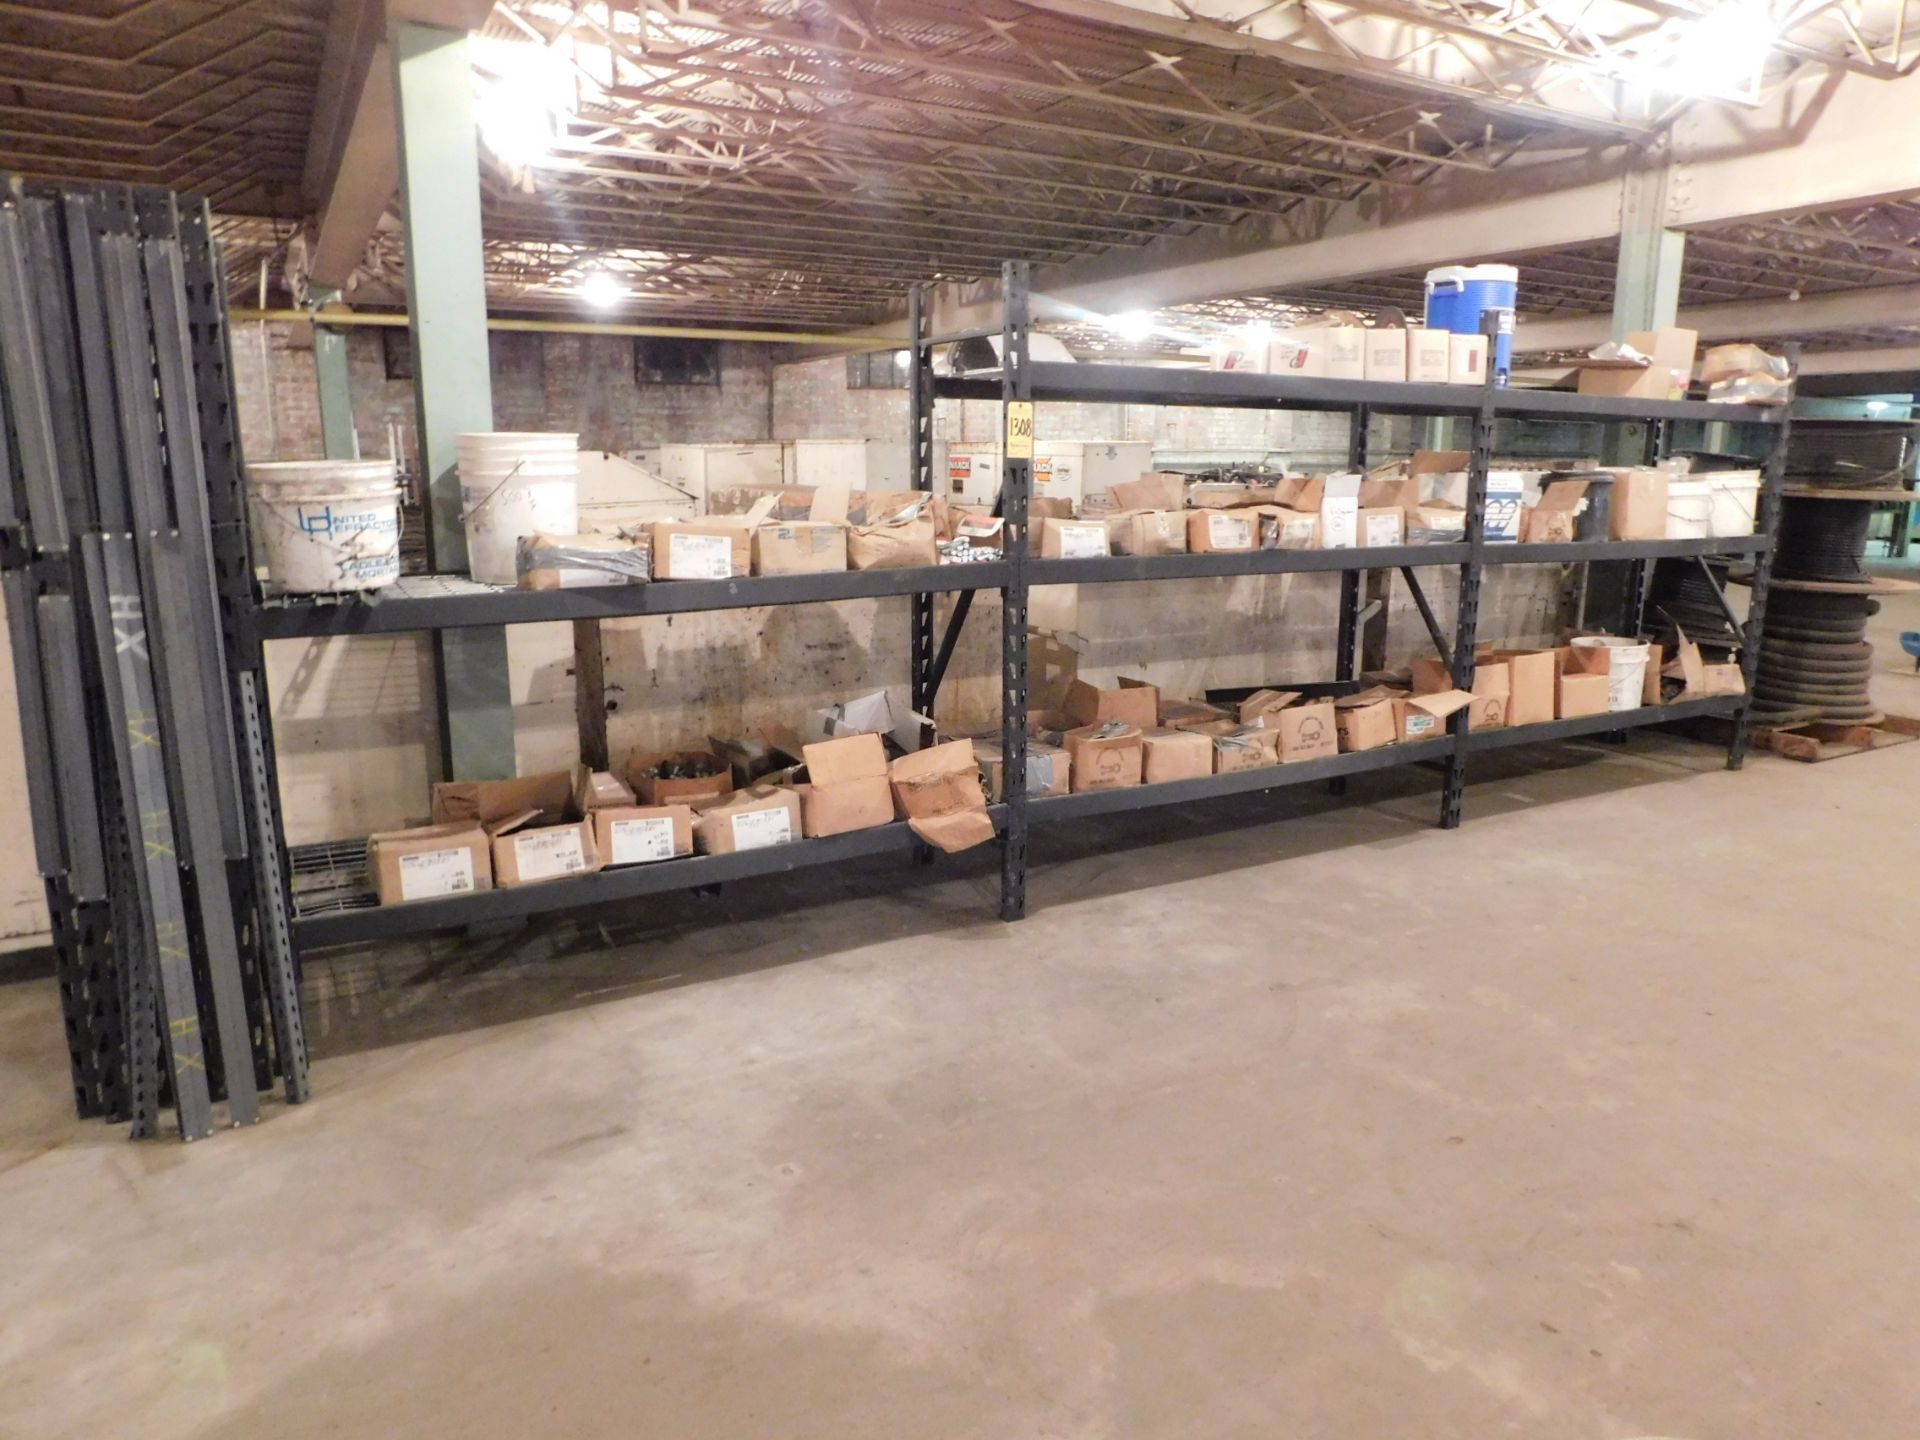 (3) Sections of Shelving and Contents, and Extra Shelving Uprights